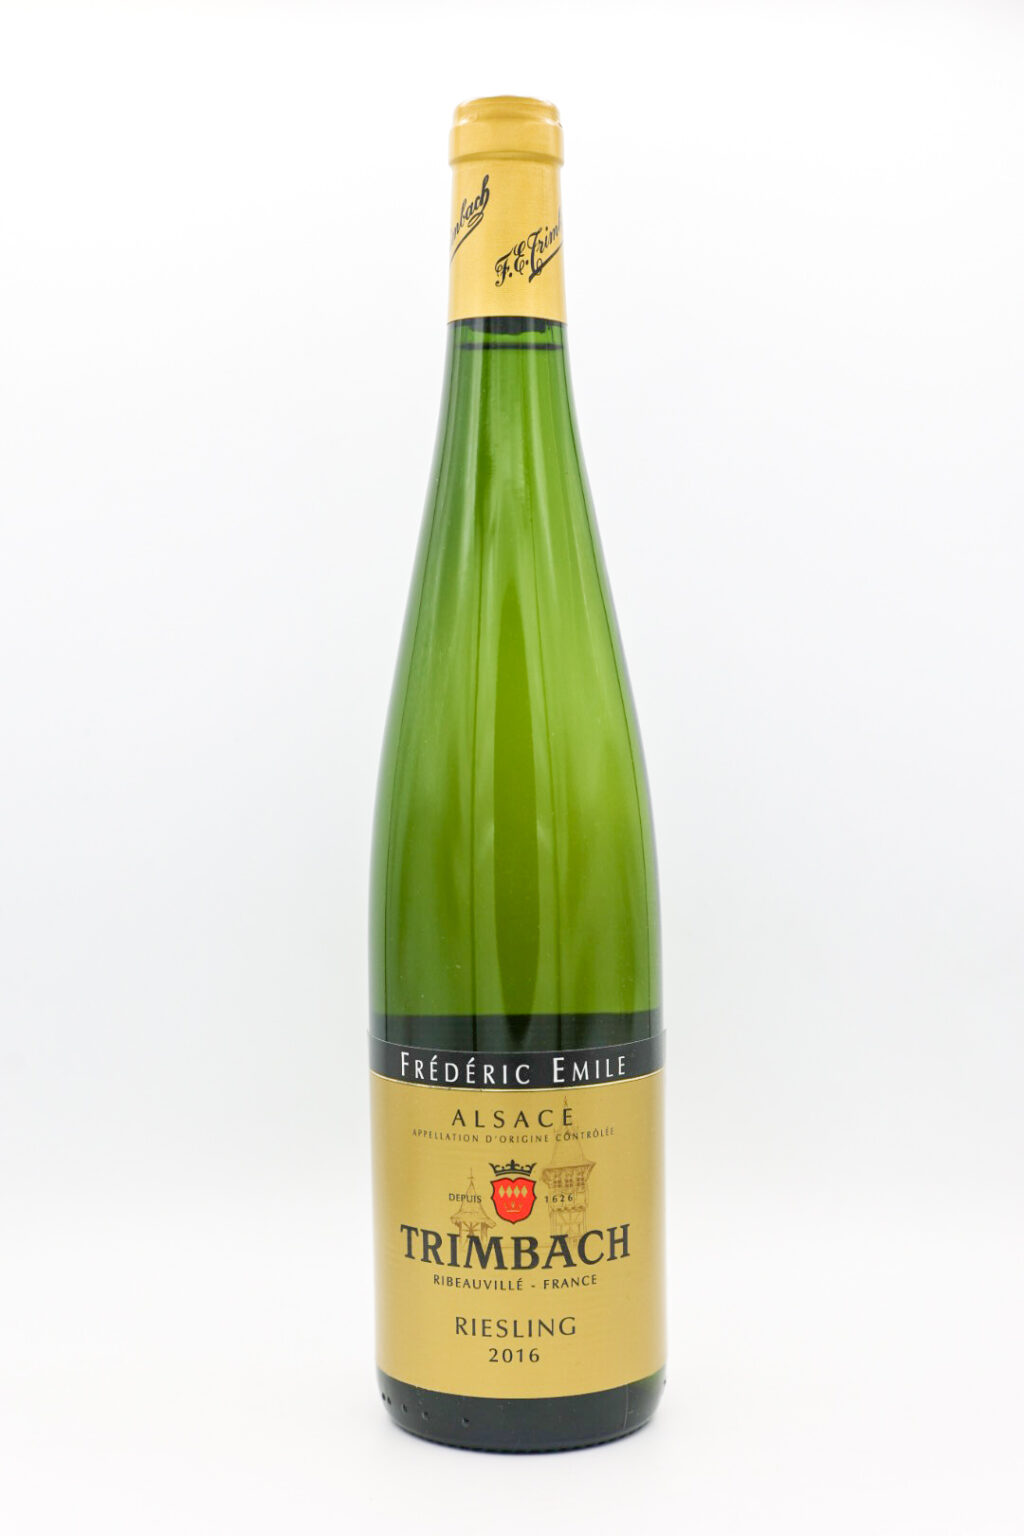 Trimbach Cuvee Frederic Emile Riesling 2016